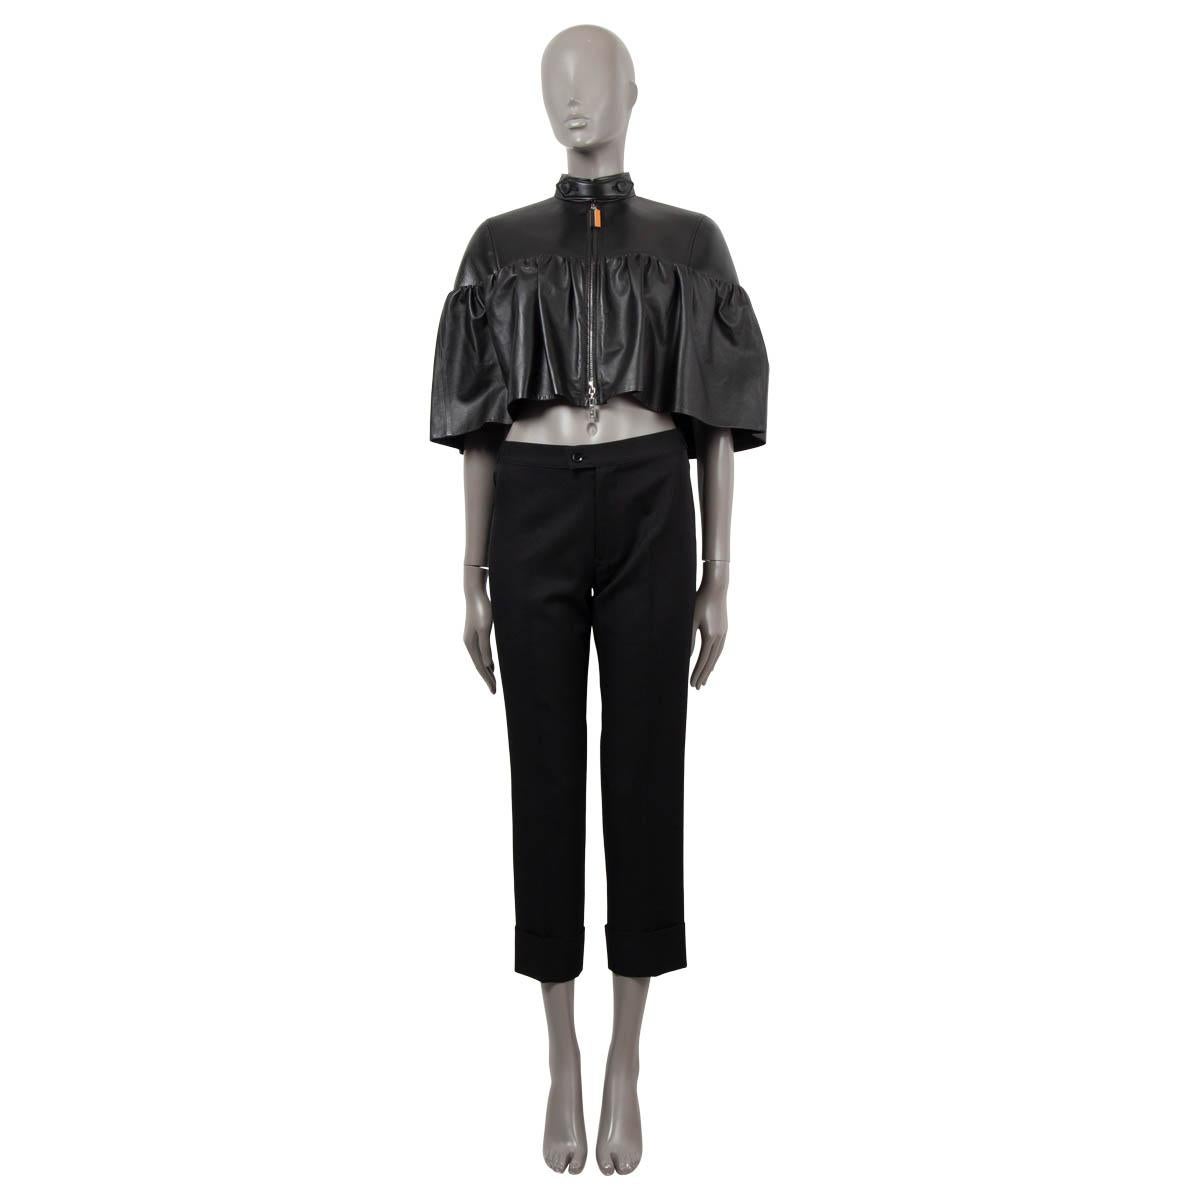 100% authentic Louis Vuitton bolero jacket in black subtle lambskin leather (100%) with gathered lower half that adds a feminine couture touch to the smooth biker look on the top. Closes with a zipper on the front and is lined in silk (100%). Has